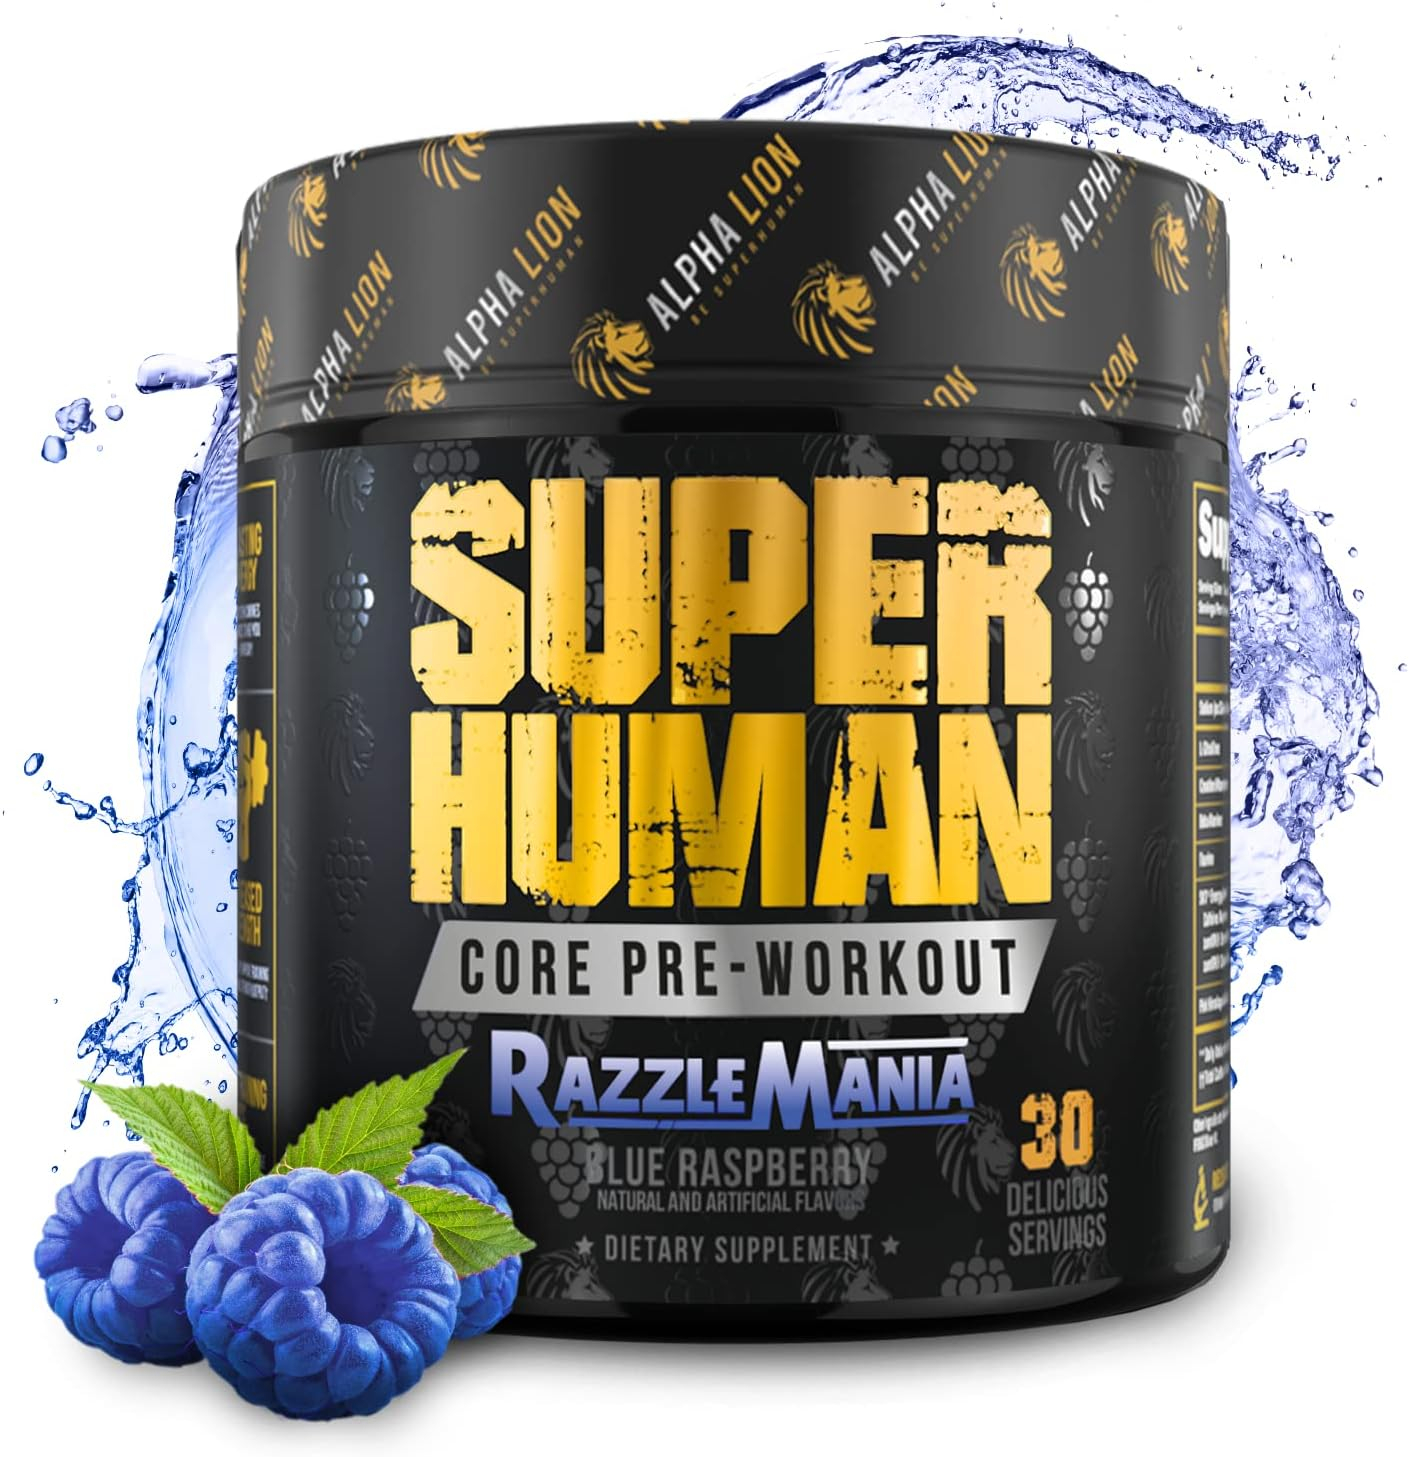 ALPHA LION Core Pre Workout w/Creatine for Performance, Beta Alanine for Muscle, Powder, L-Citrulline for Pump  Tri-Source Caffeine for Sustained Energy (30 Servings, Blue Raspberry Flavor)